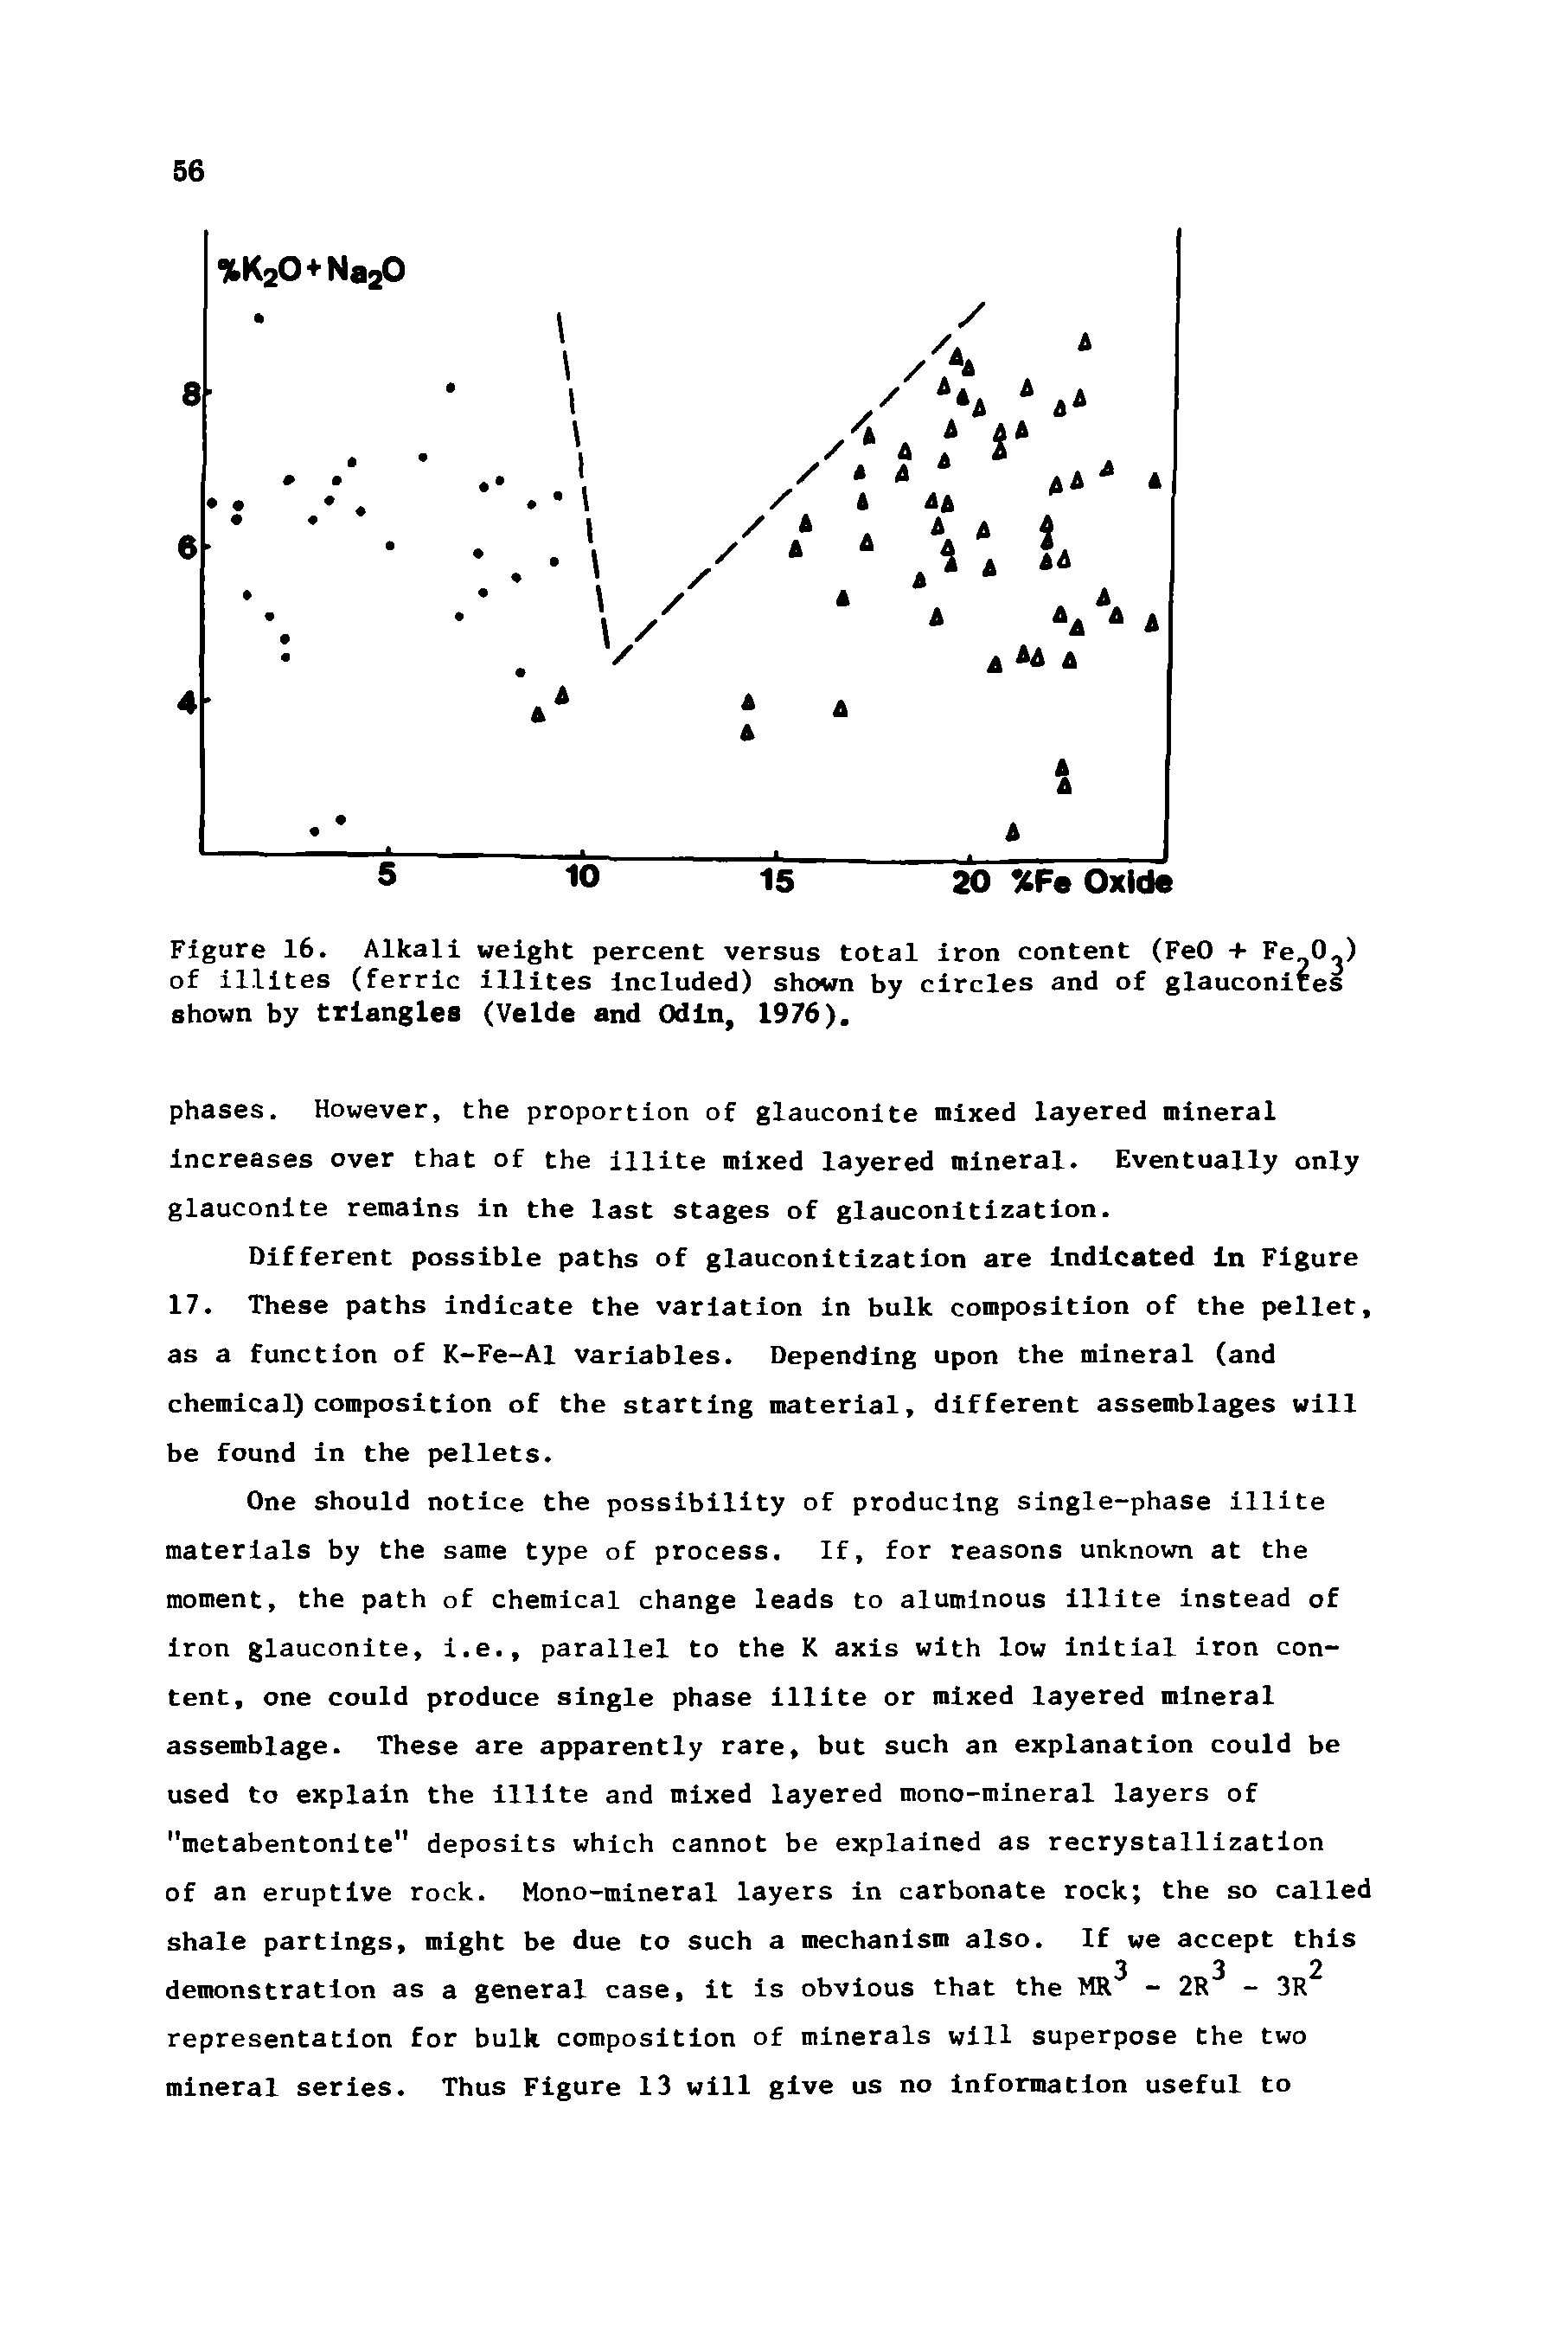 Figure 16. Alkali weight percent versus total iron content (FeO + Fe 0.) of il.lites (ferric illites included) shown by circles and of glauconites shown by triangles (Velde and Odin, 1976).